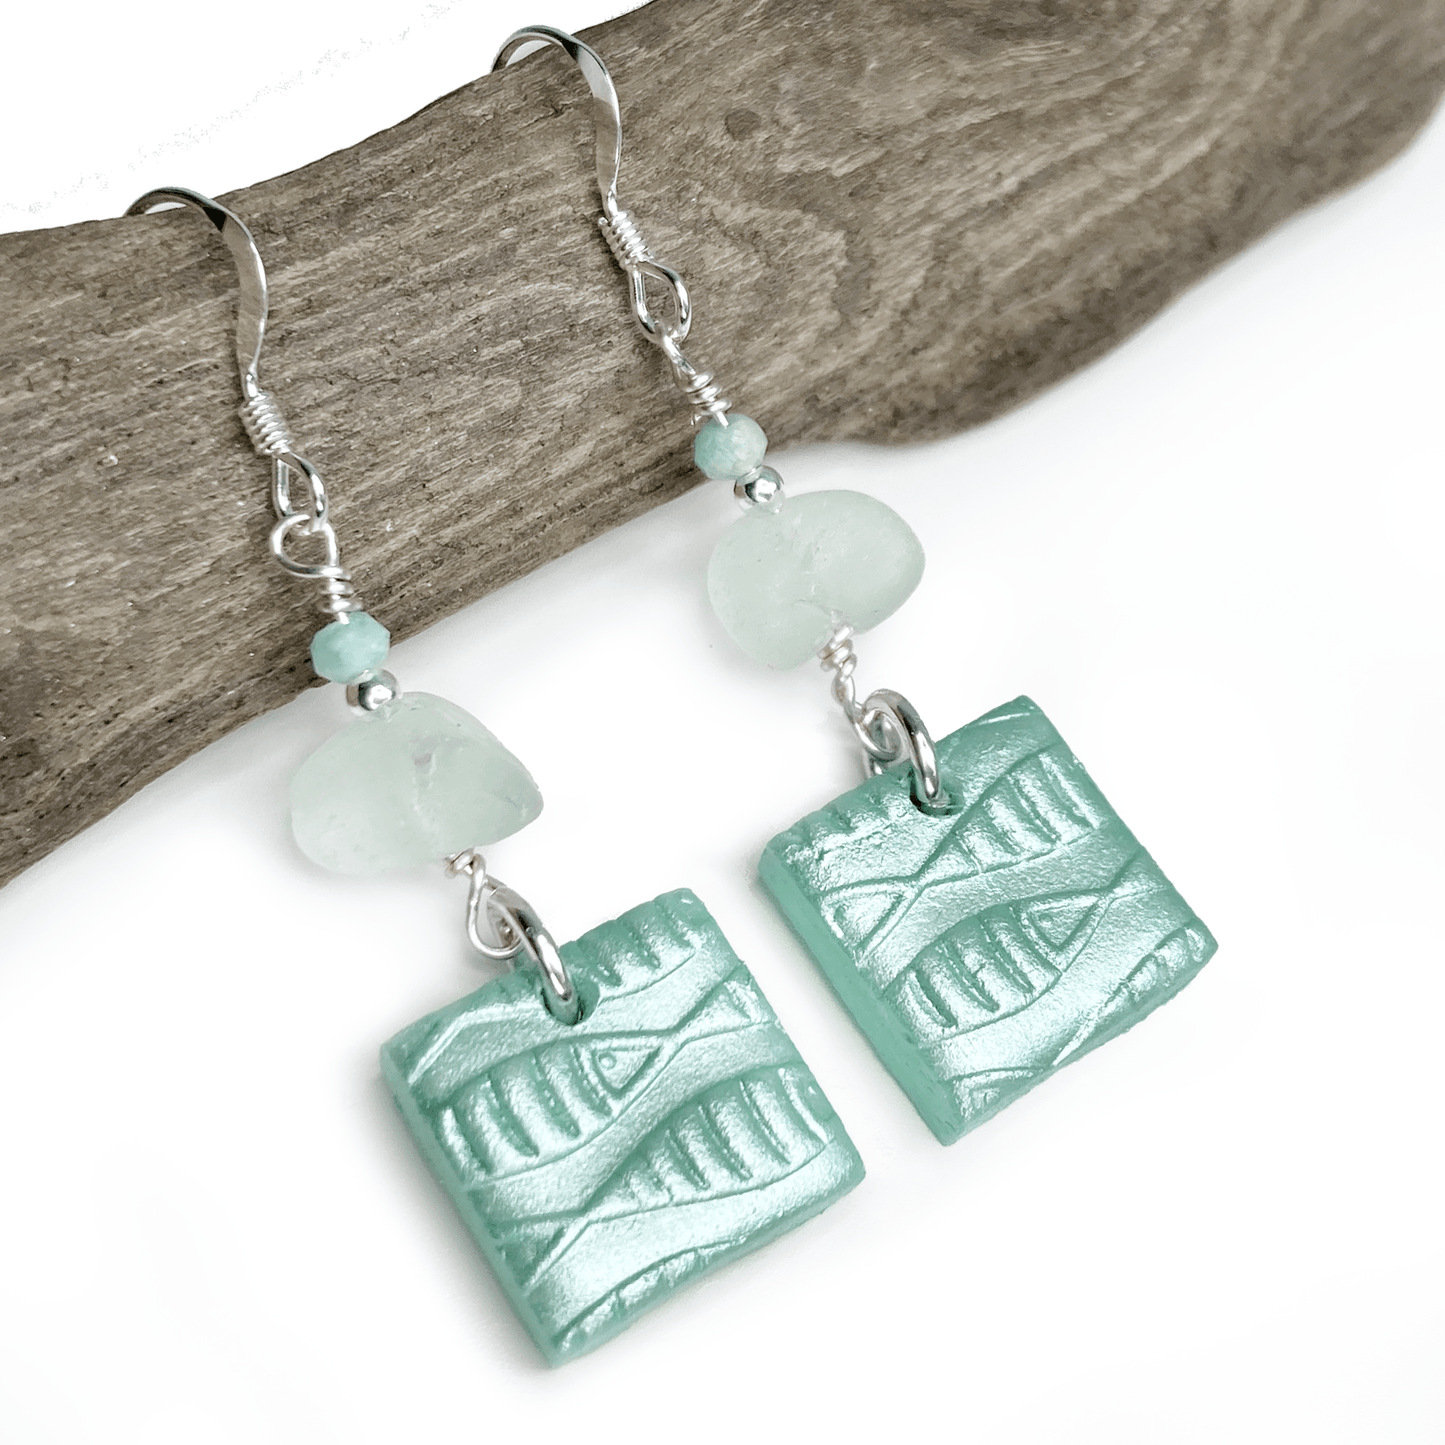 Fish Shoal Dangly Earrings - Green Sea Glass and Amazonite Sterling Silver Earrings - East Neuk Beach Crafts